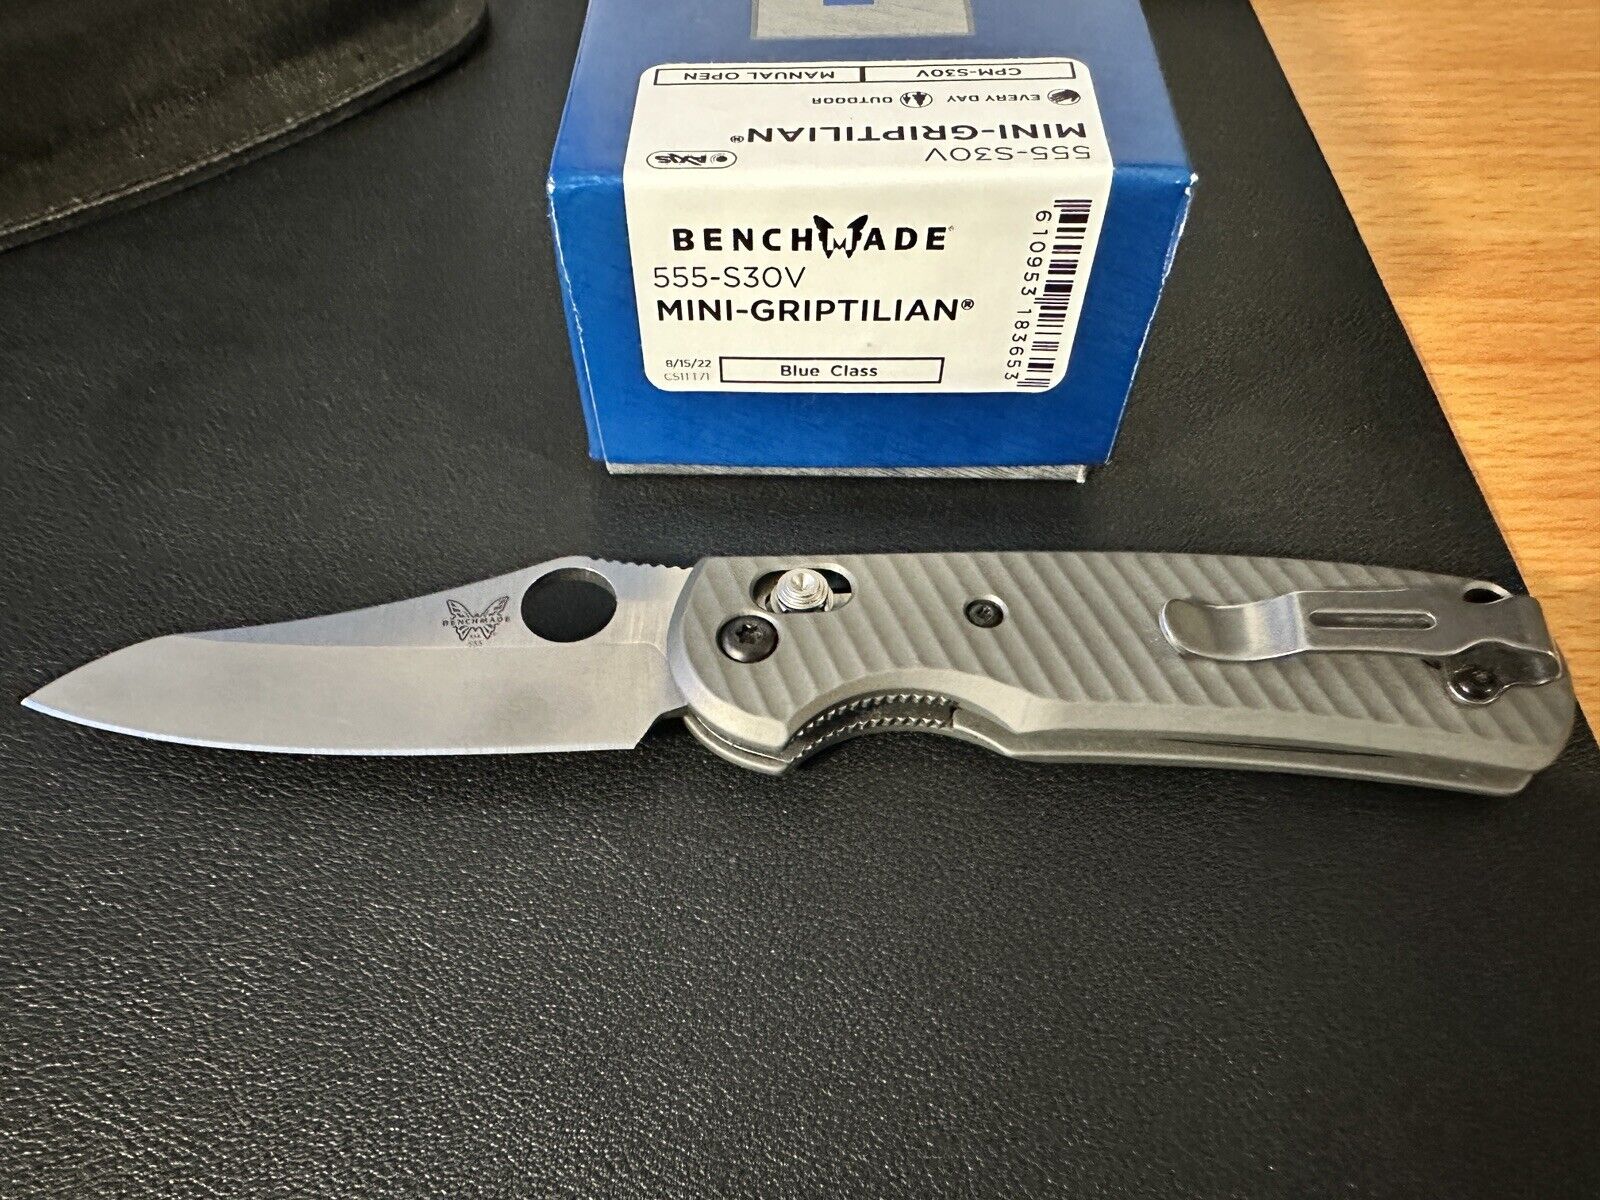 Benchmade 555 S30V Mini Griptilian Knife With AWT Scales - New